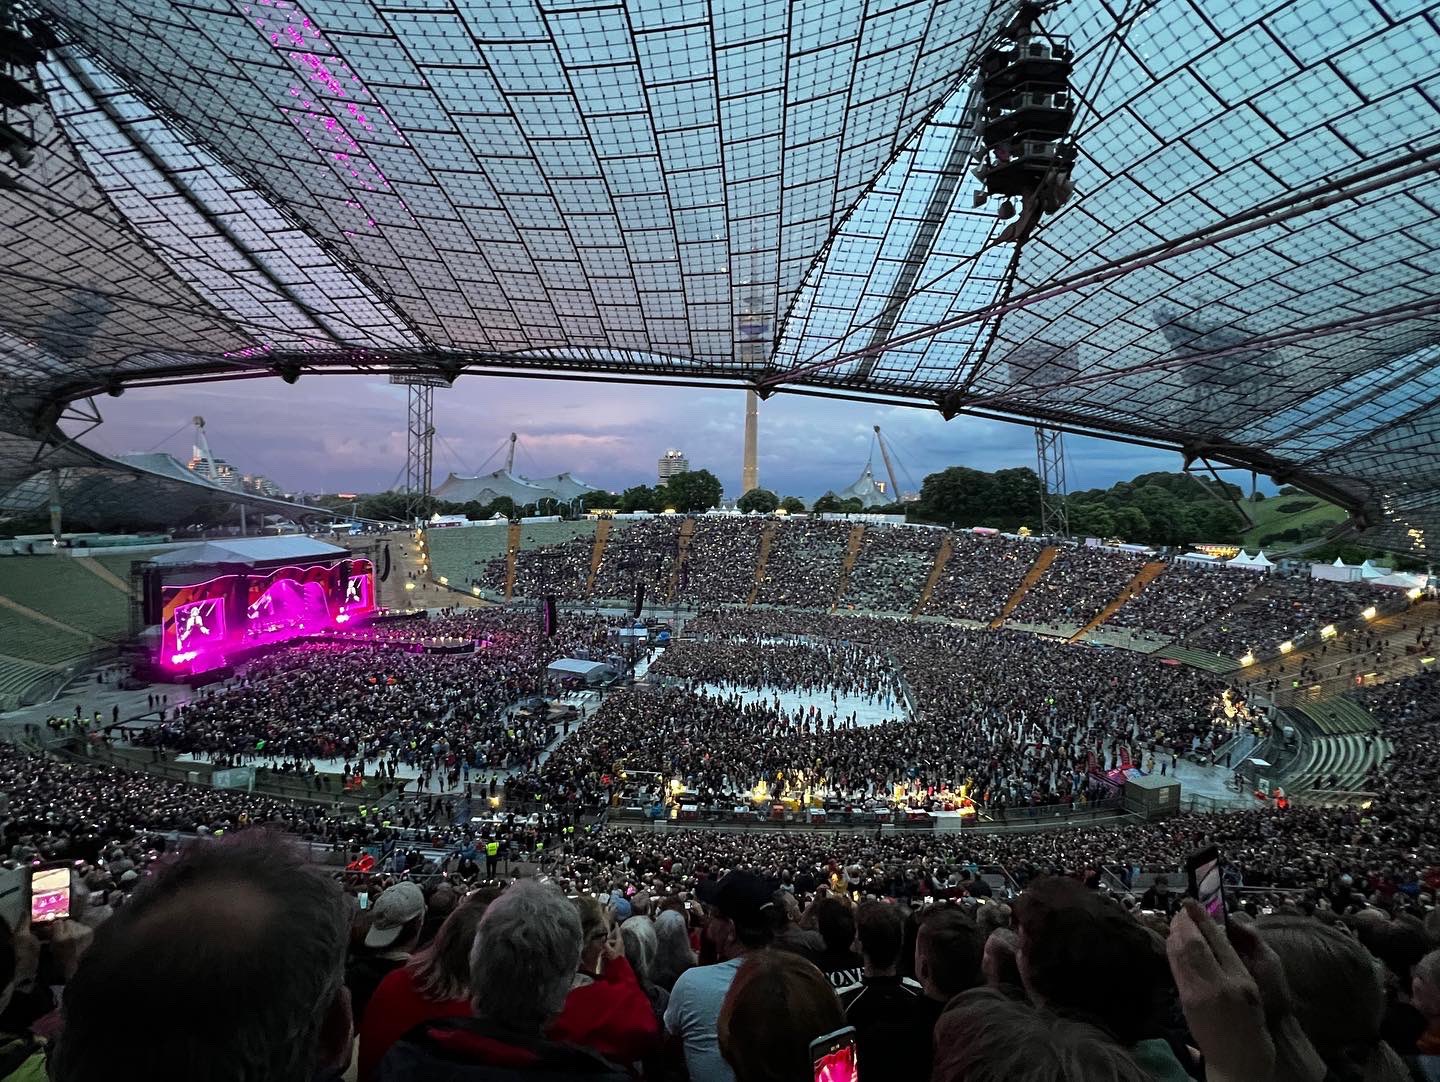 Munich the place to be tonight! The Rolling Stones News Hackney